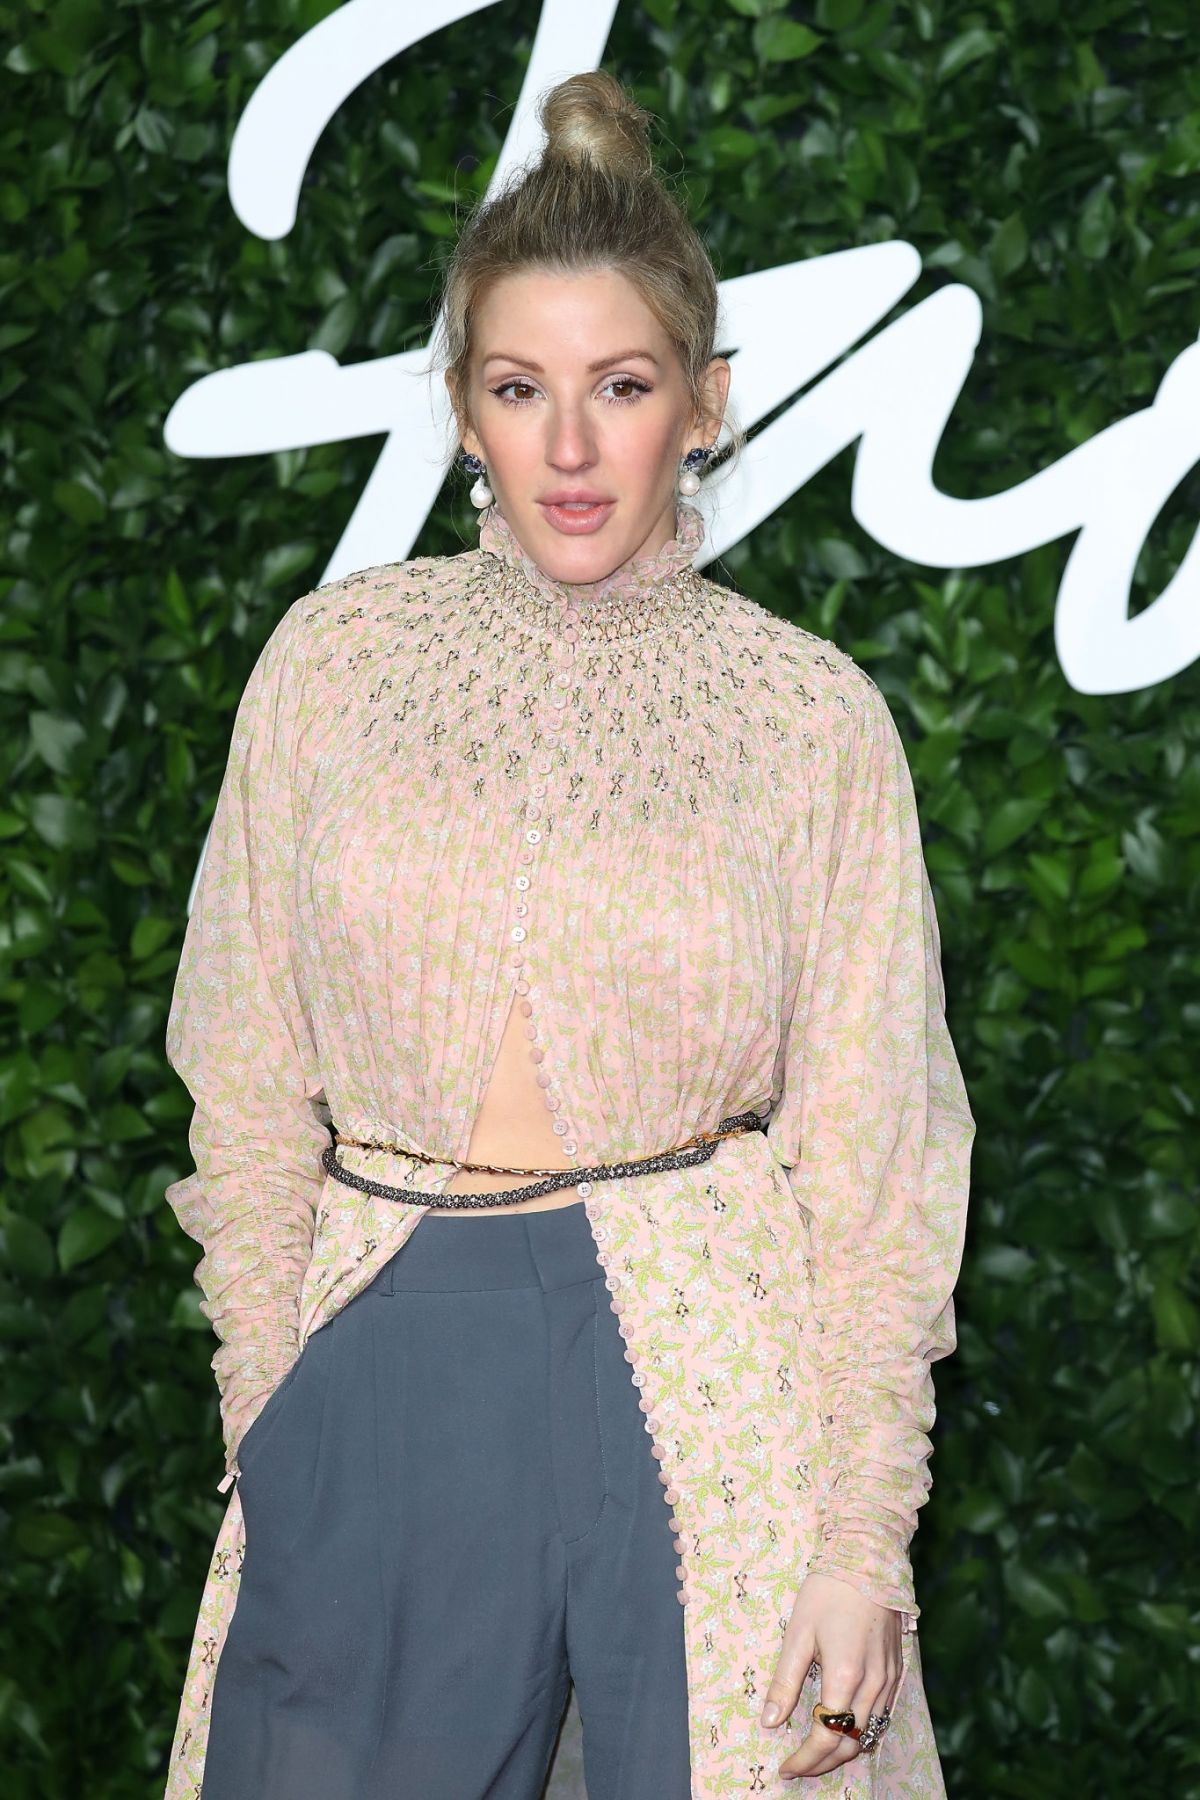 Ellie Goulding At Fashion Awards 2019 In London 12 02 2019